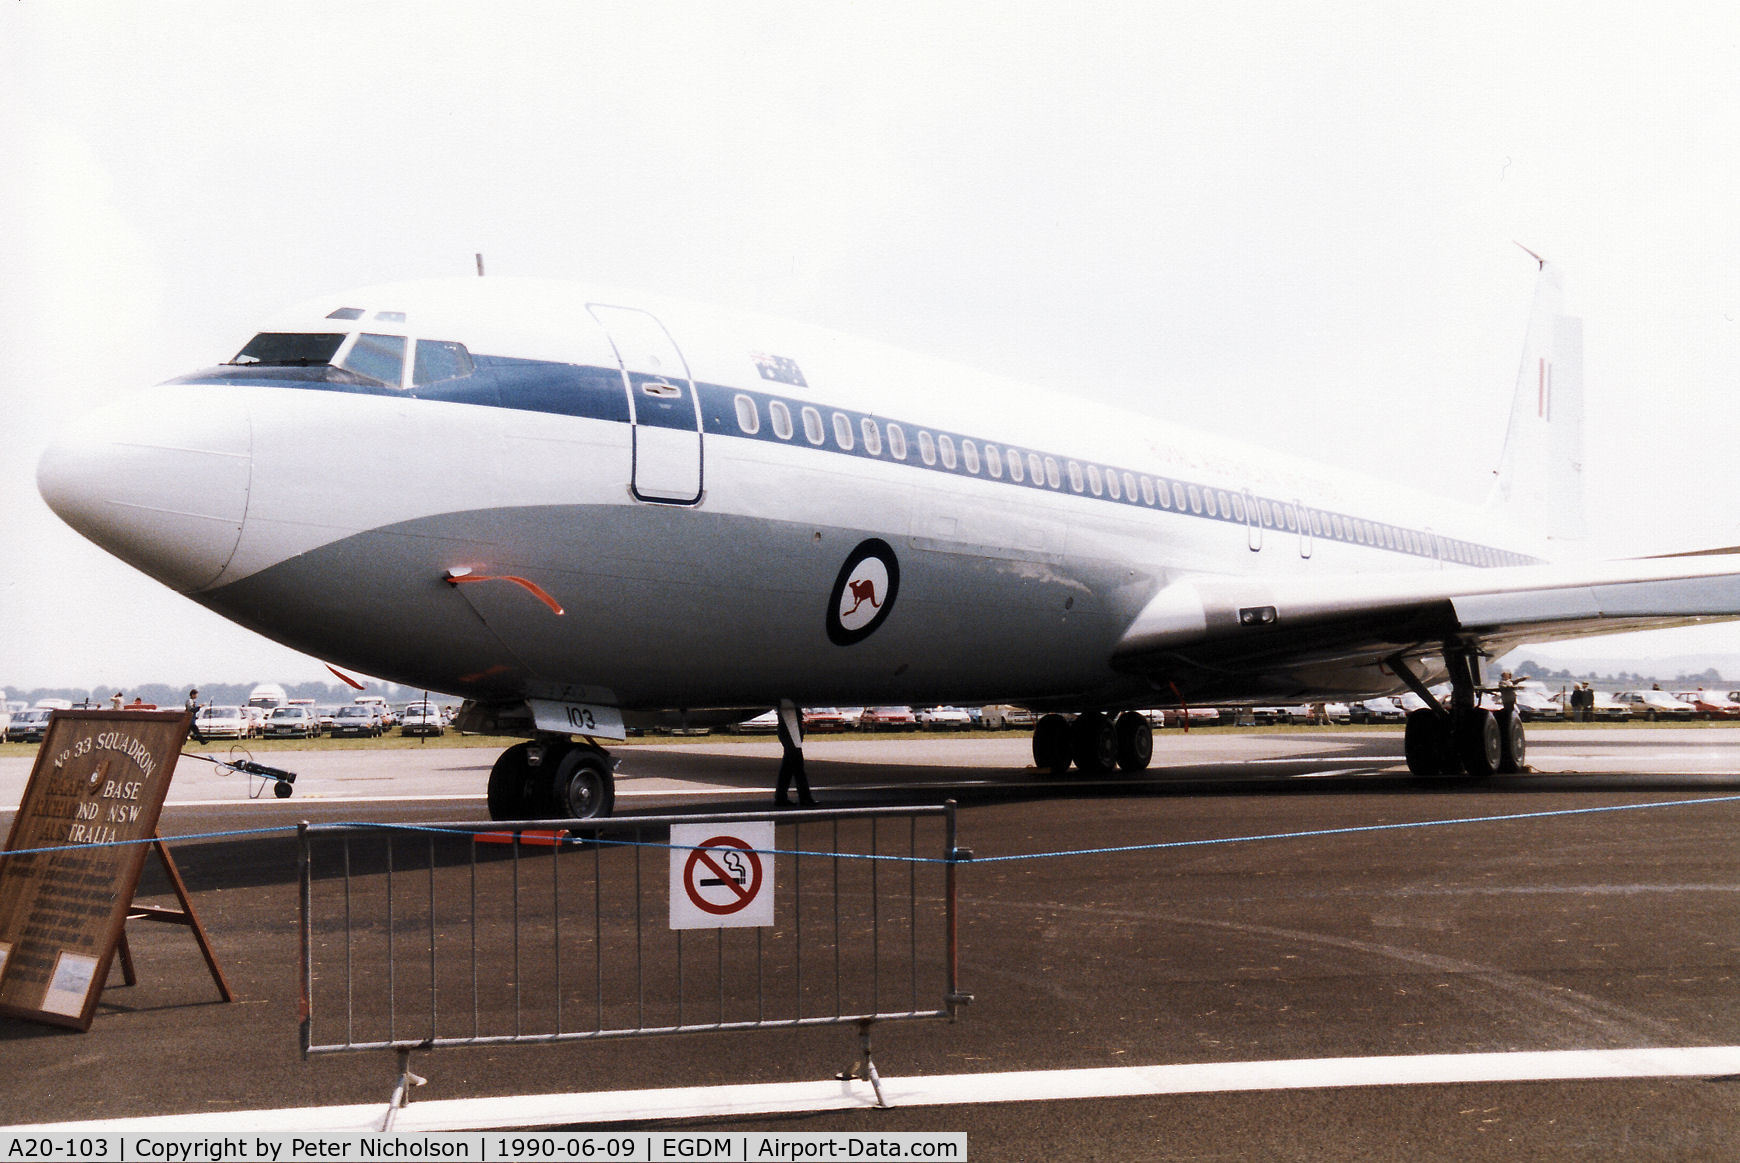 A20-103, 1975 Boeing 707-368C C/N 21103, Boeing 707-368C, callsign Embassy 198, of 33 Squadron Royal Australian Air Force on display at the 1990 Boscombe Down Battle of Britain 50th Anniversary Airshow.